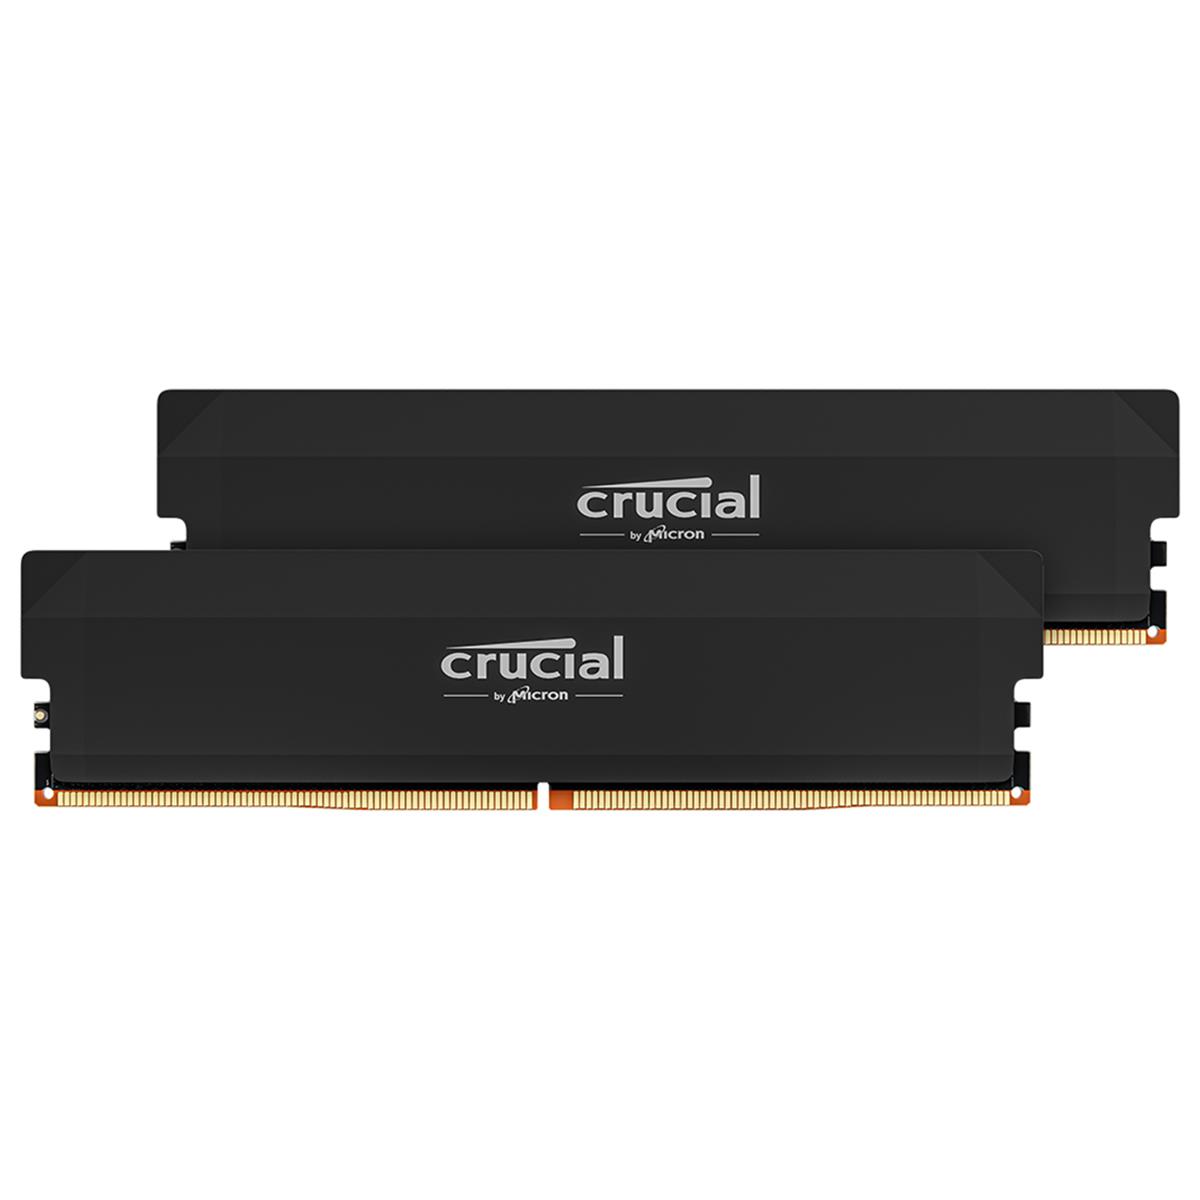 Image of Crucial Pro Overclocking 32GB (2x16GB) DDR5 6000MT/s CL36 UDIMM Memory Module